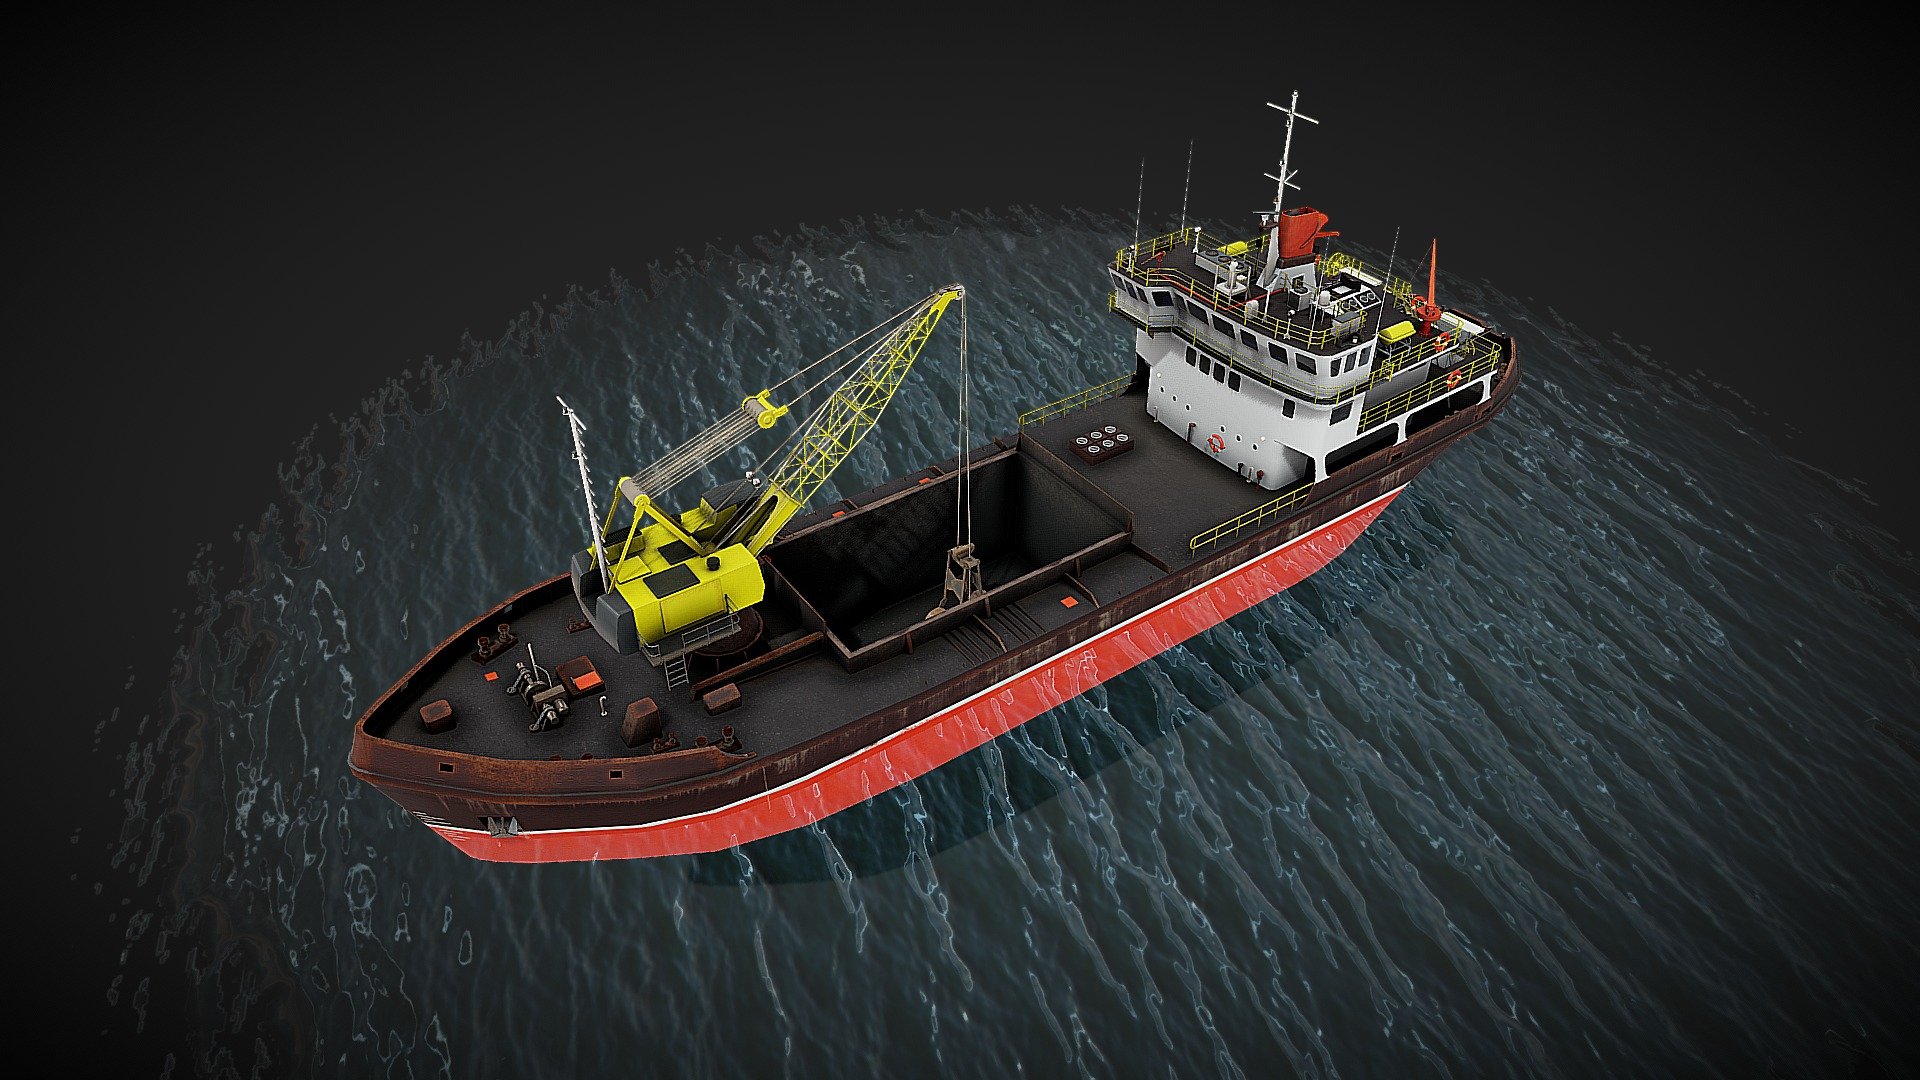 Game ready river ship. Model scale Unity engine. The ship's crane and its bucket are separated from the main model to allow animation of the crane's operation. Also, by removing the crane, you get a regular ship 3d model